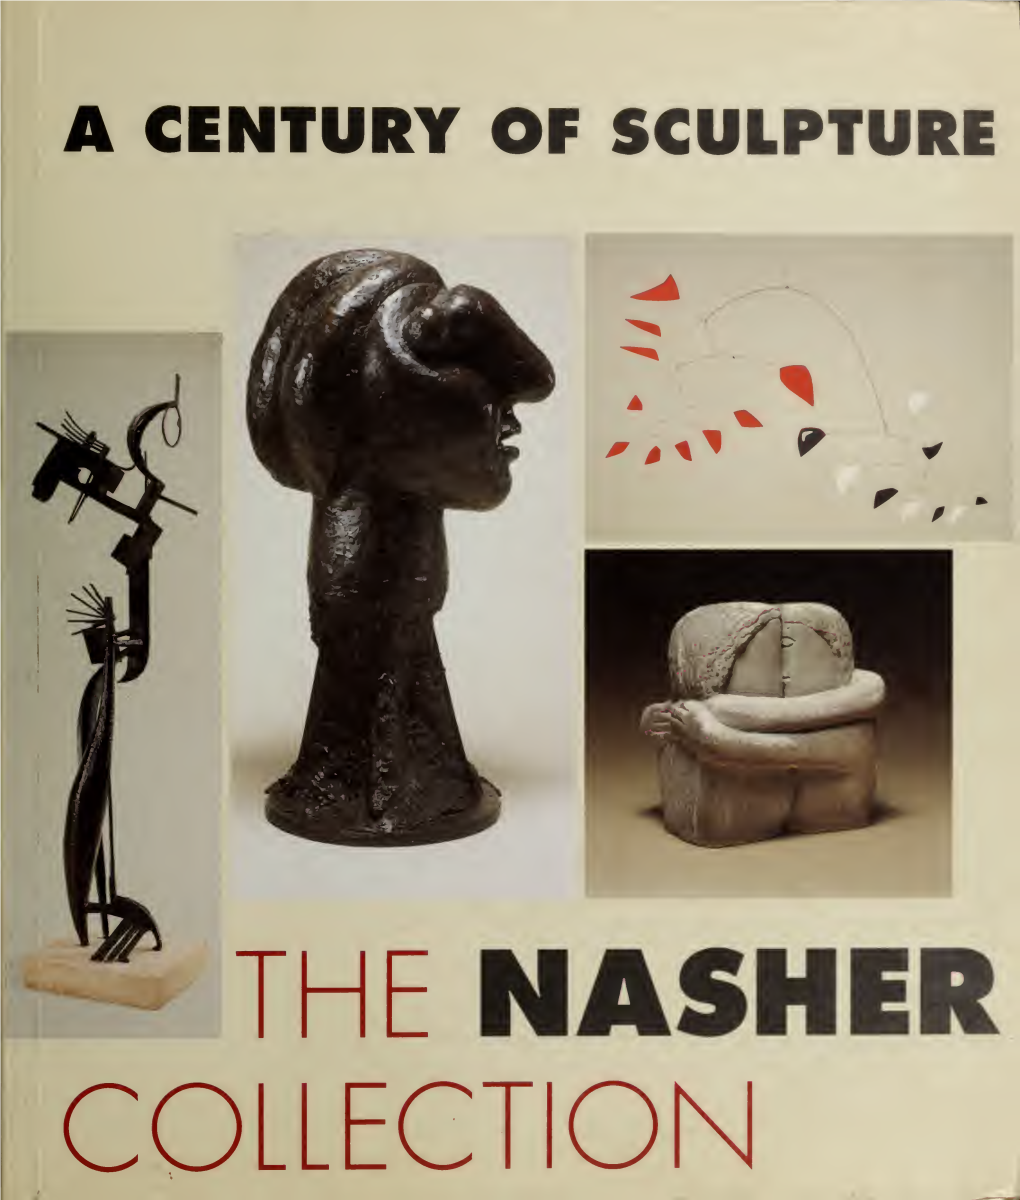 A Century of Sculpture : the Nasher Collection